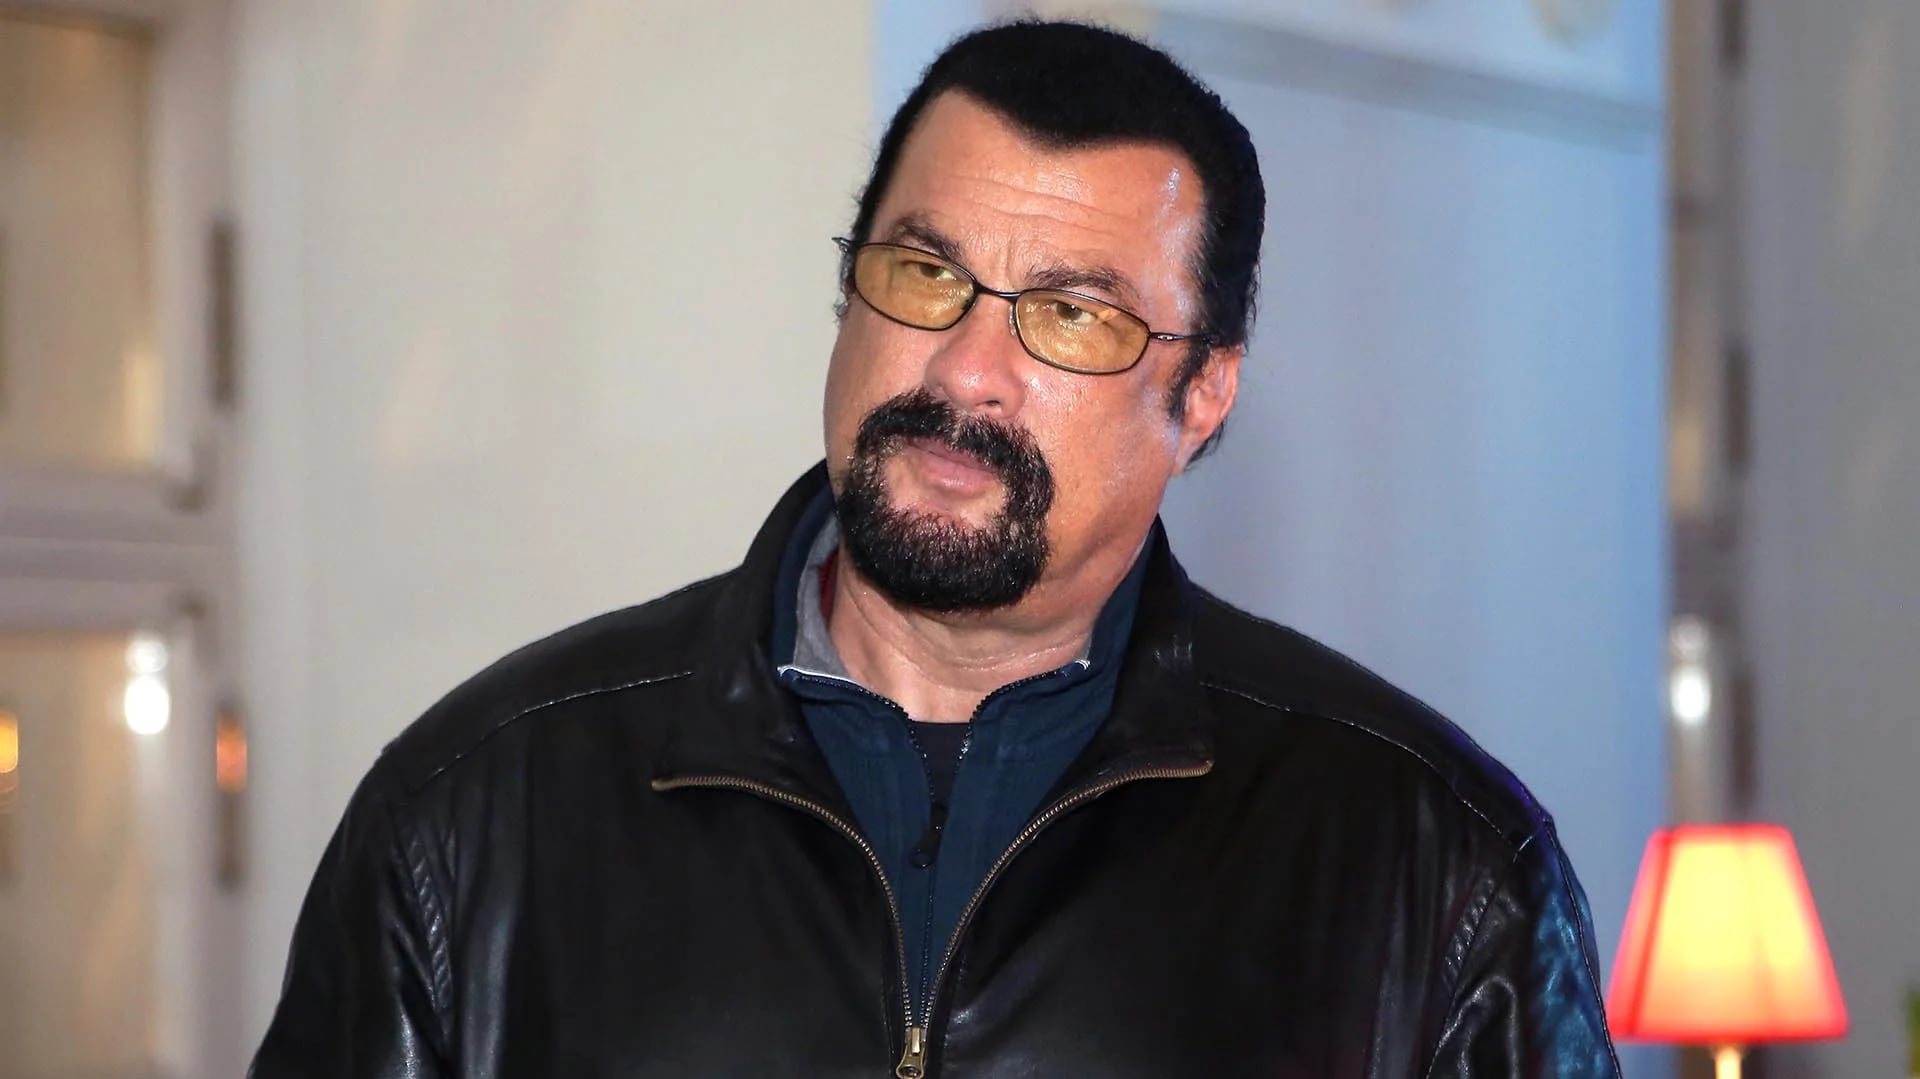 Steven Seagal. (Photo by Kristina Nikishina/Getty Images for Mercedes-Benz Fashion Week Russia)